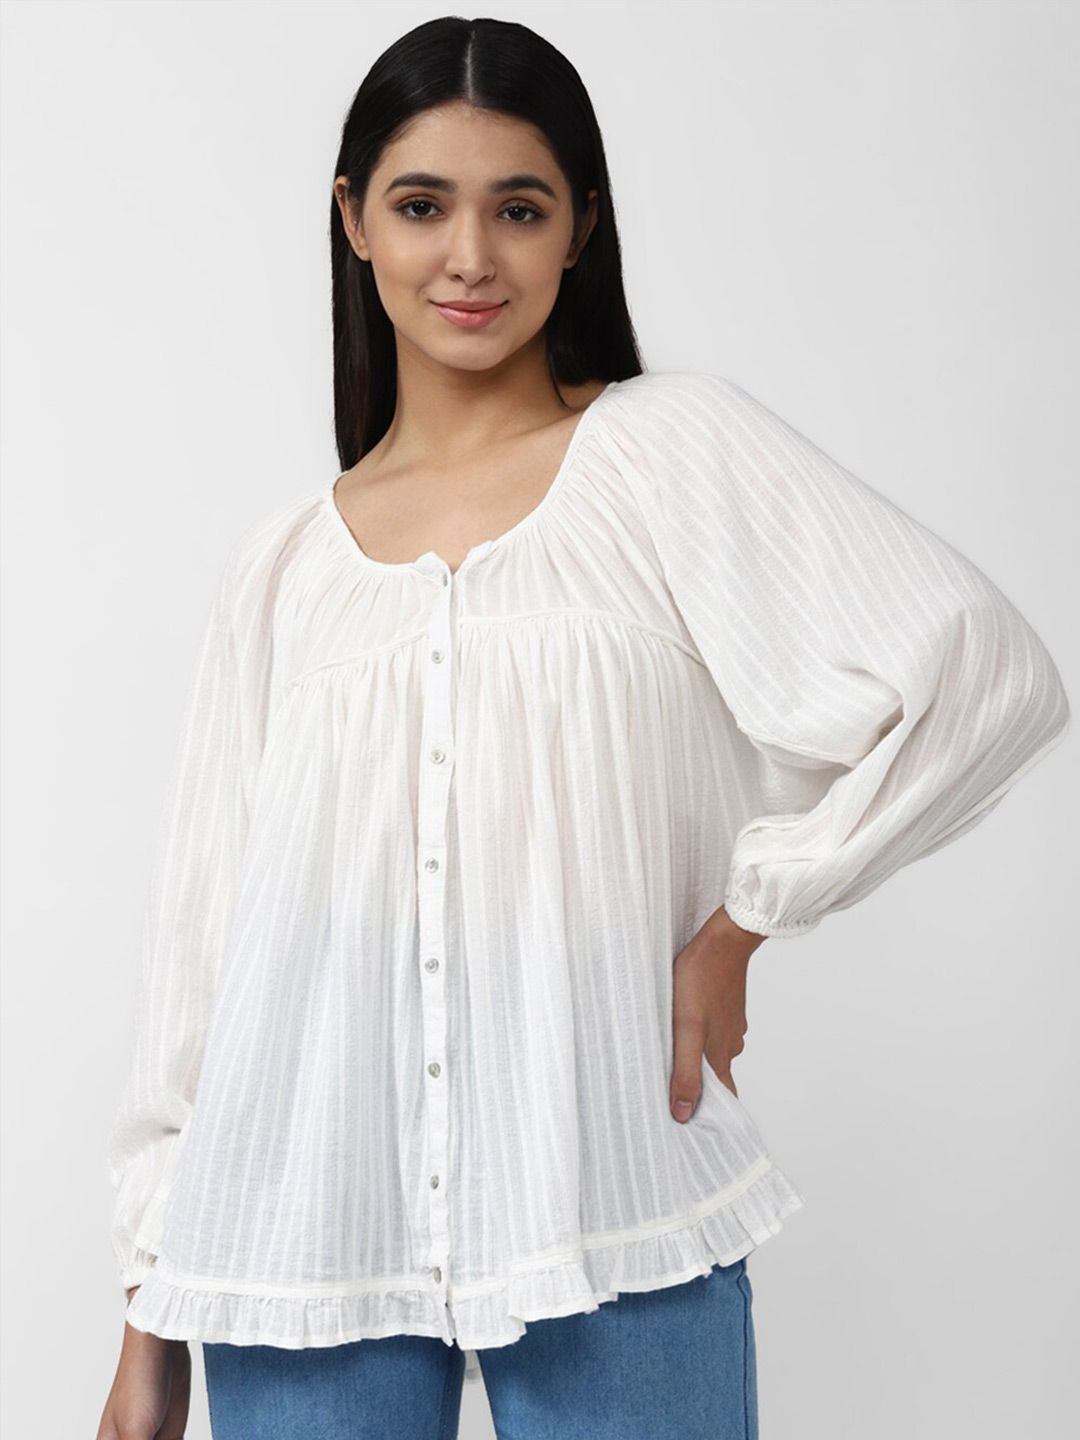 AMERICAN EAGLE OUTFITTERS White Striped Top Price in India